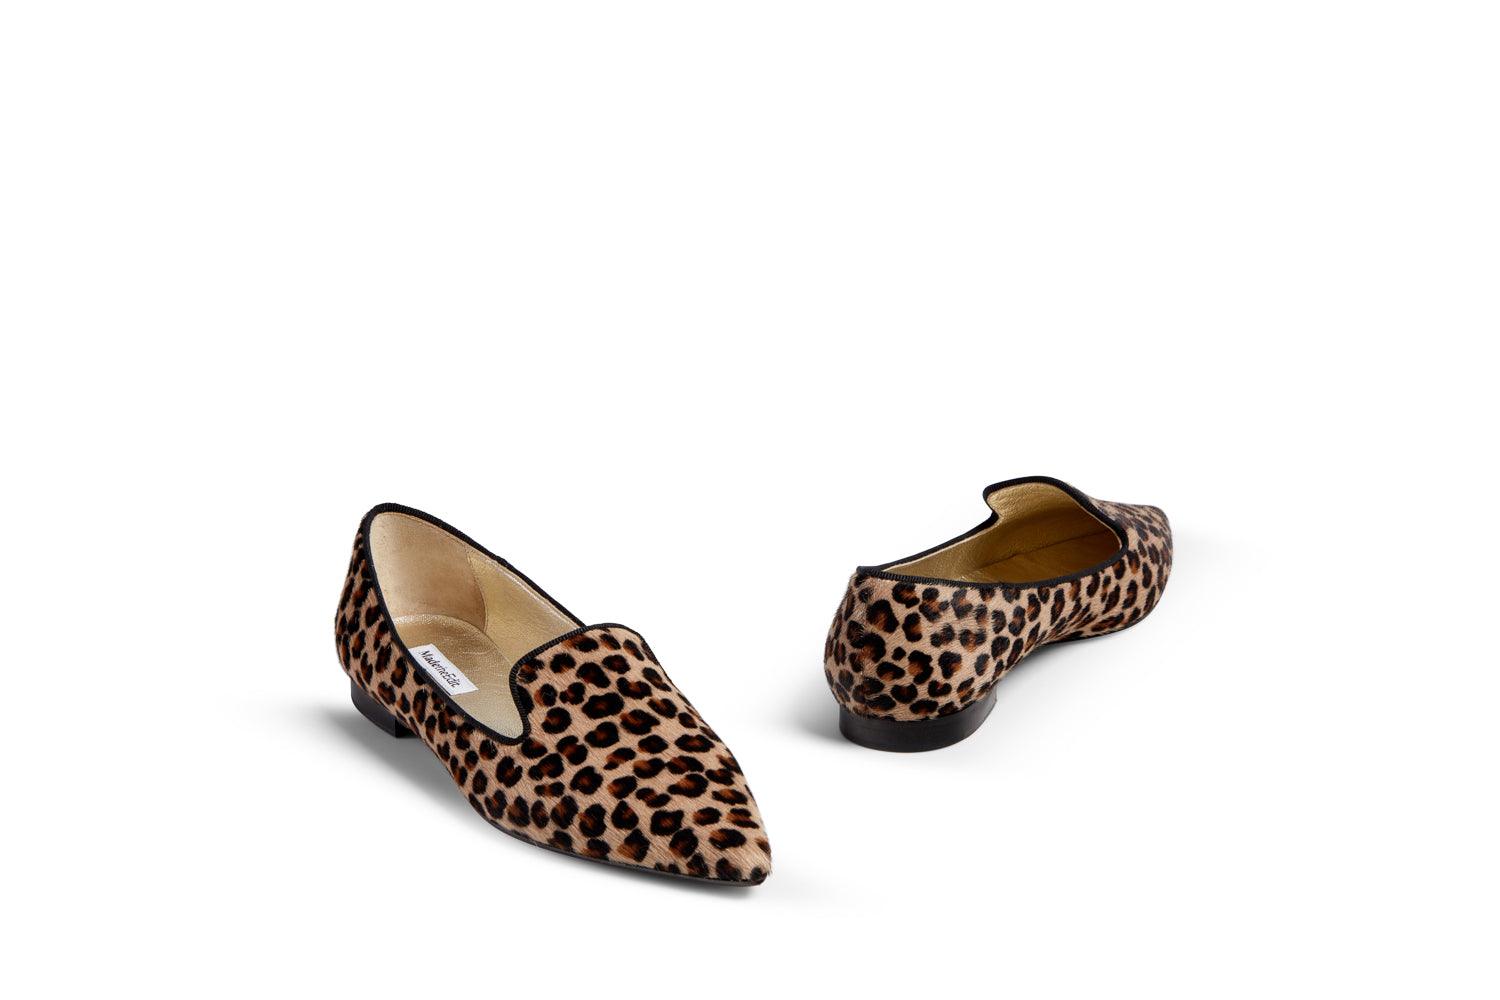 Lizzie Leopard flats - MADE THE EDIT